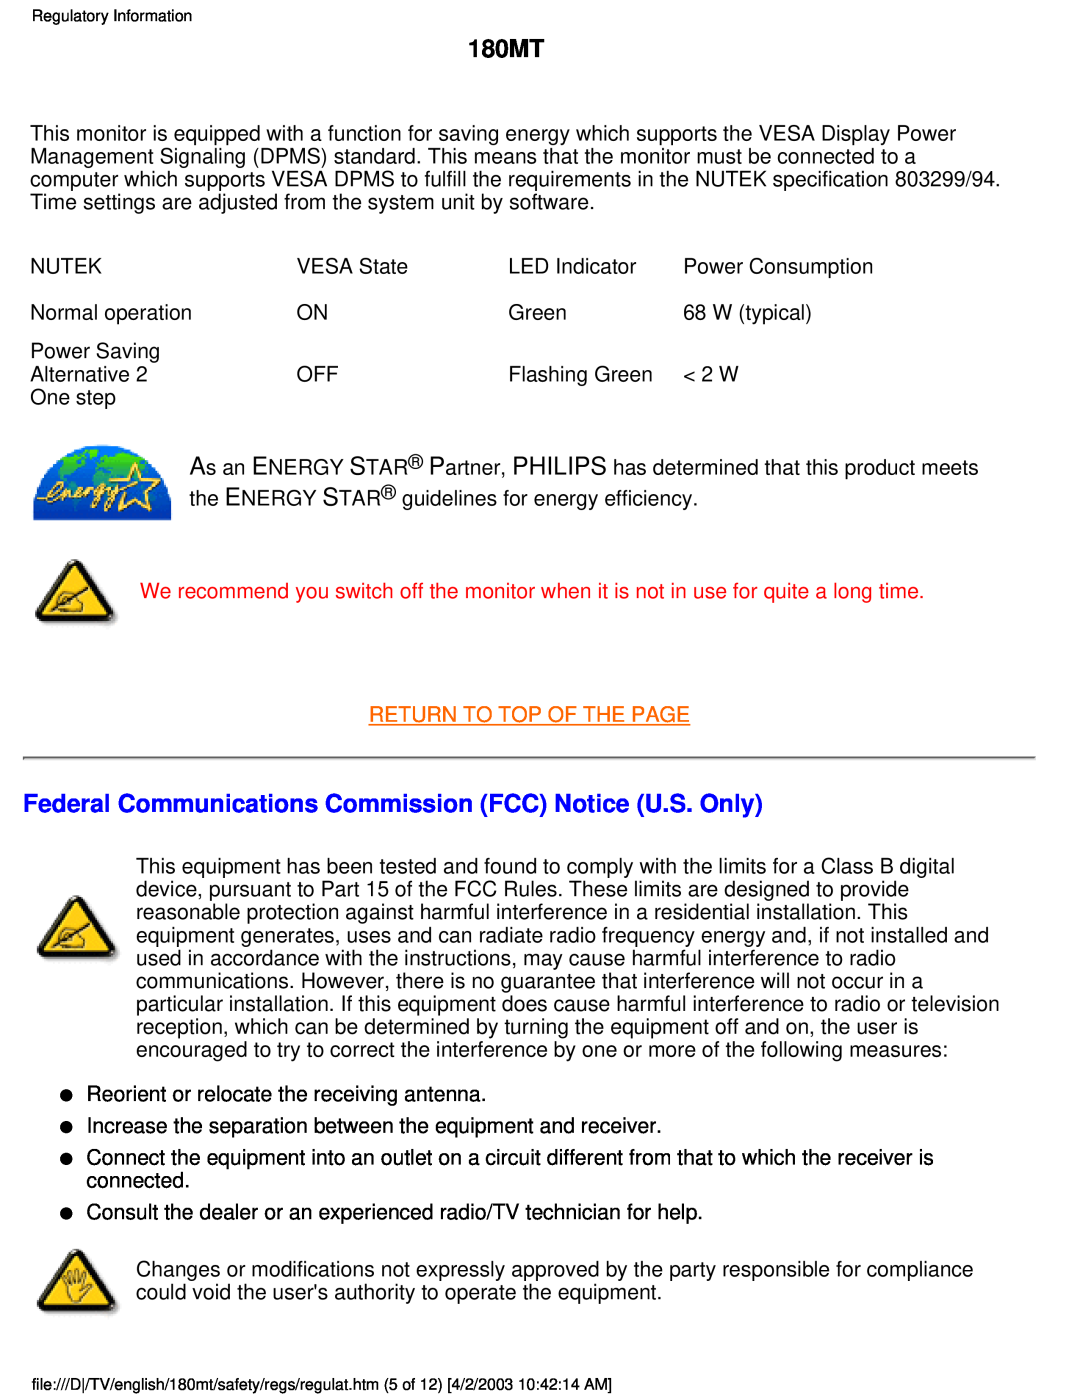 Philips 180MT manual Federal Communications Commission FCC Notice U.S. Only, Return To Top Of The Page 